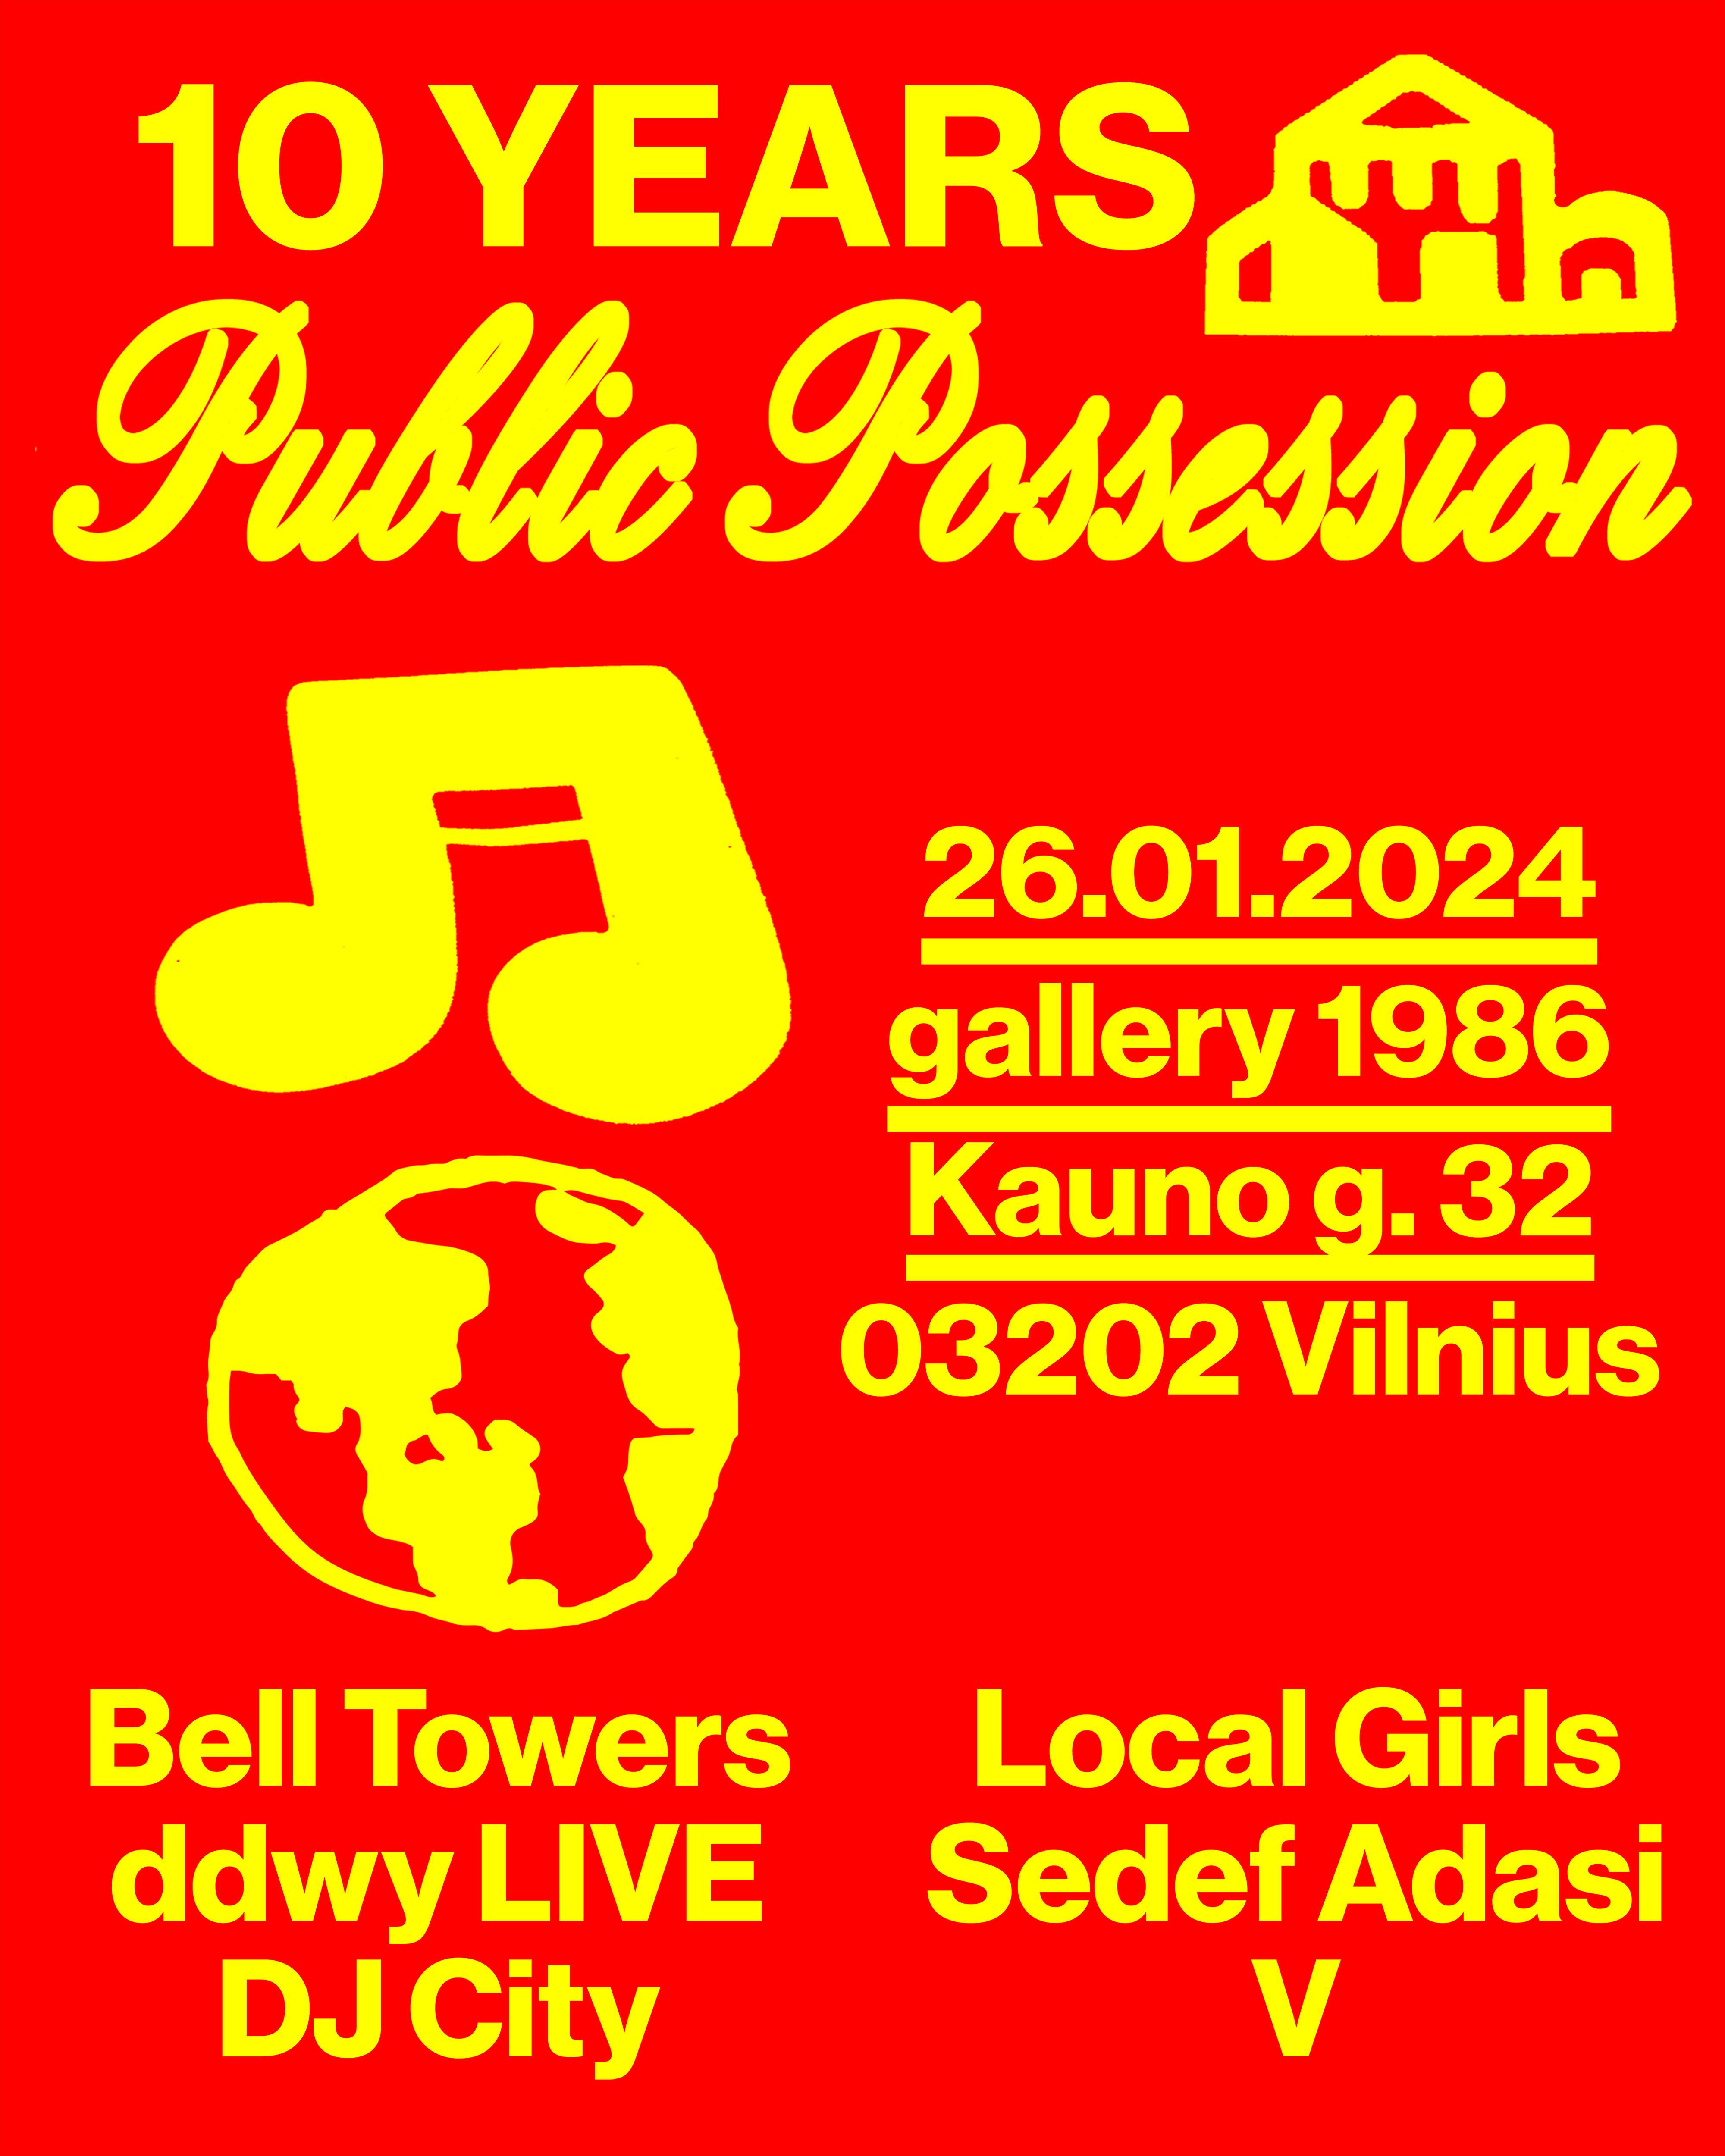 10 years of Public Possession: Bell Towers, ddwy LIVE, DJ City, Sedef Adasi, Local girls, V - Página frontal